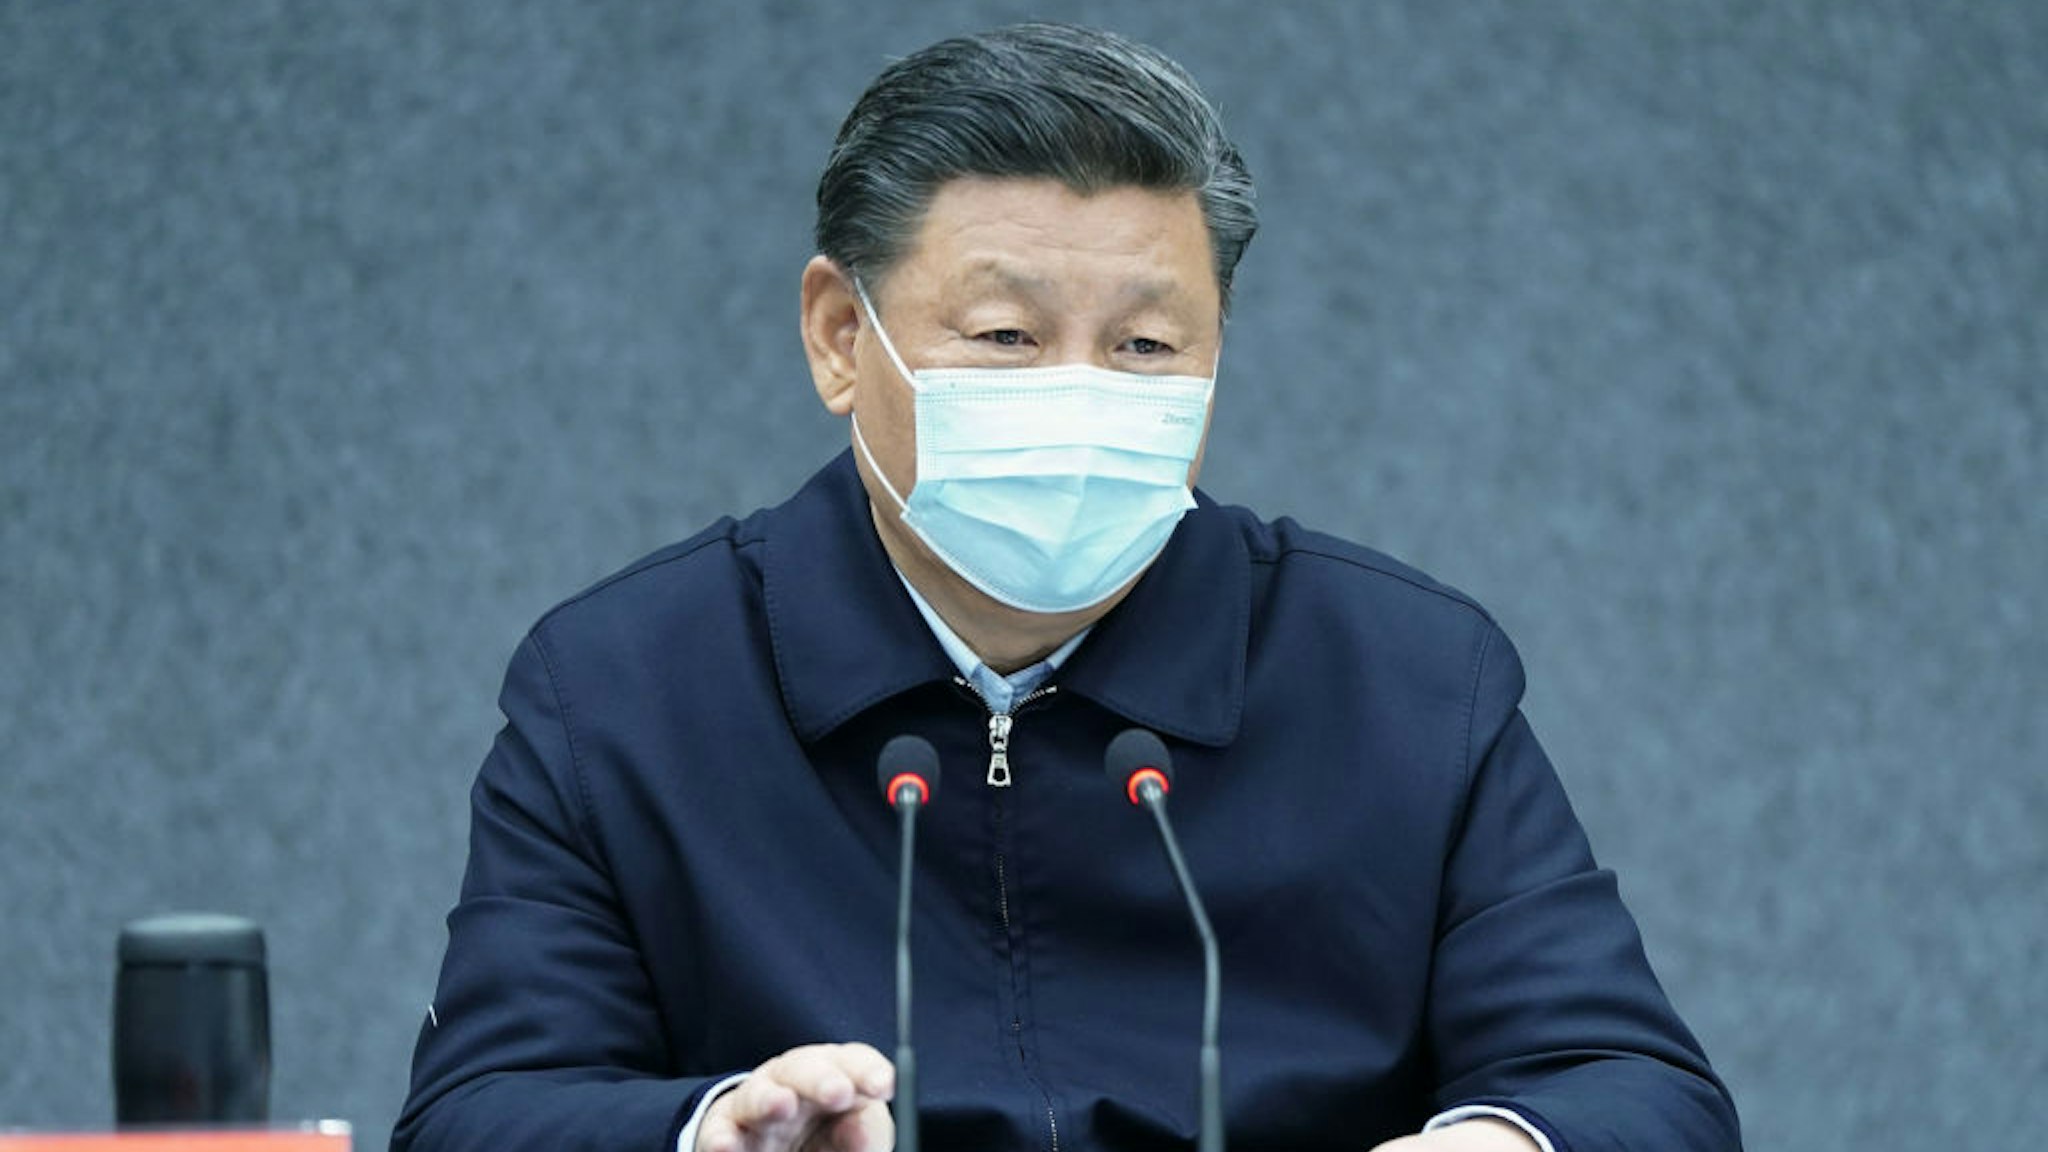 Chinese President Xi Jinping, also general secretary of the Communist Party of China Central Committee and chairman of the Central Military Commission, chairs a symposium at the School of Medicine at Tsinghua University in Beijing, capital of China, March 2, 2020.